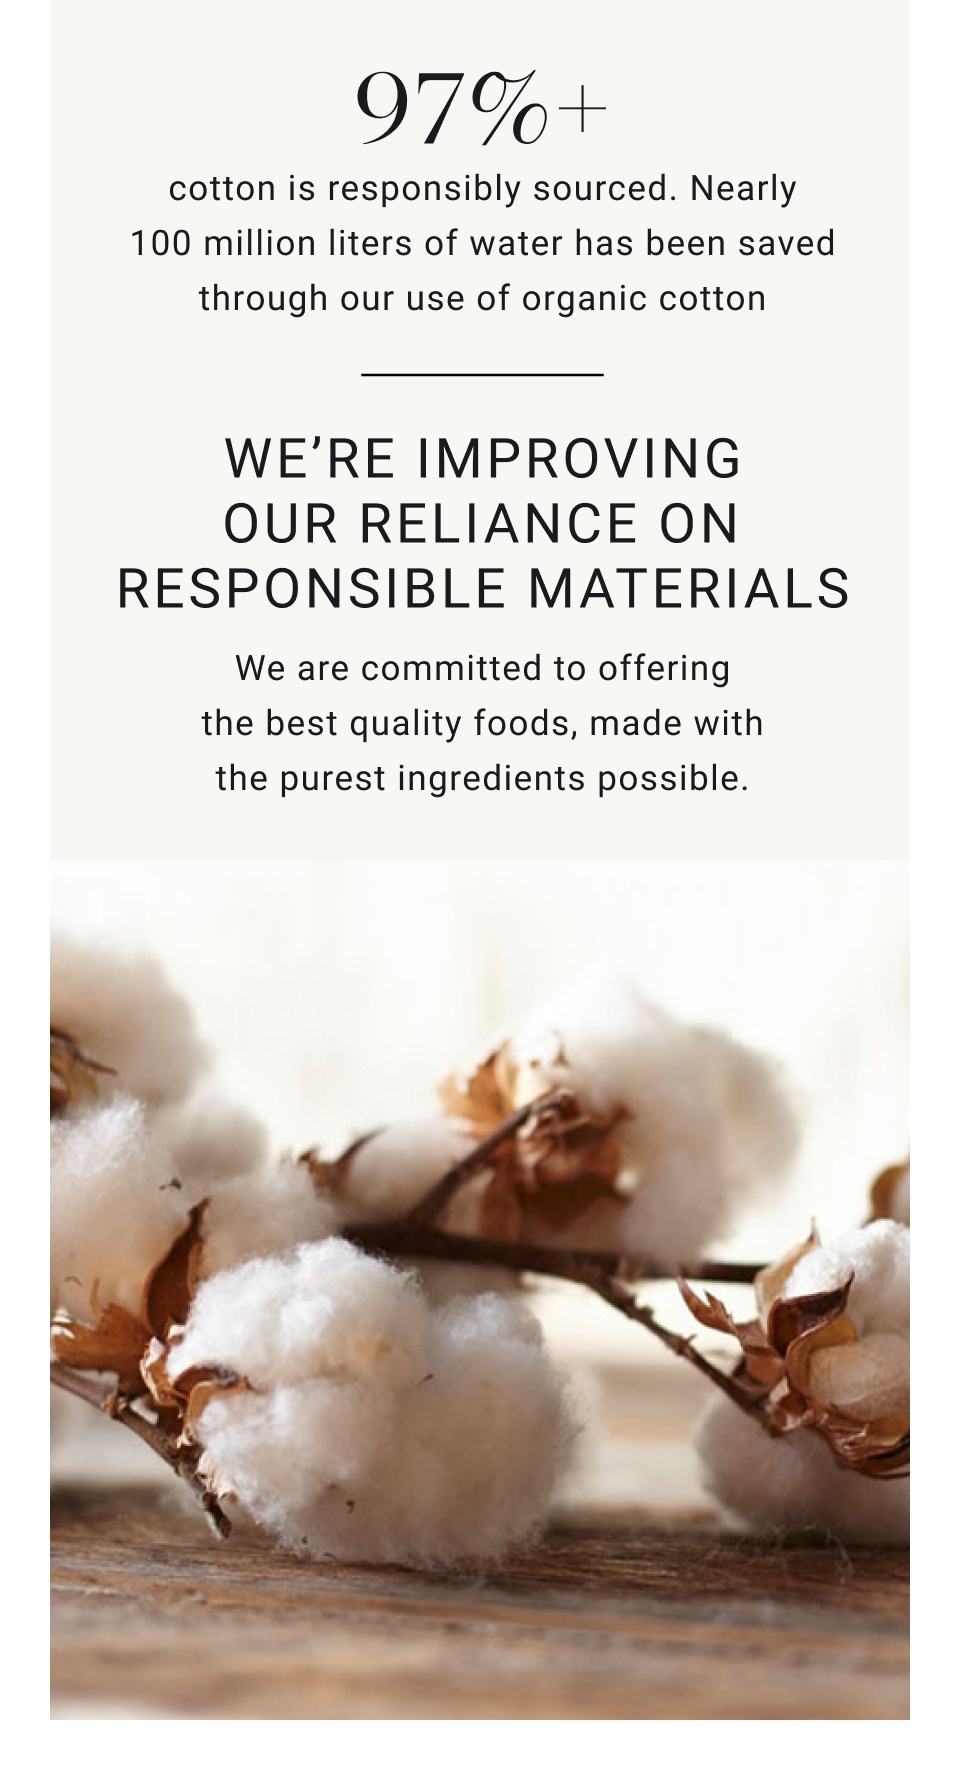 We're Improving Our Reliance on Responsible Materials